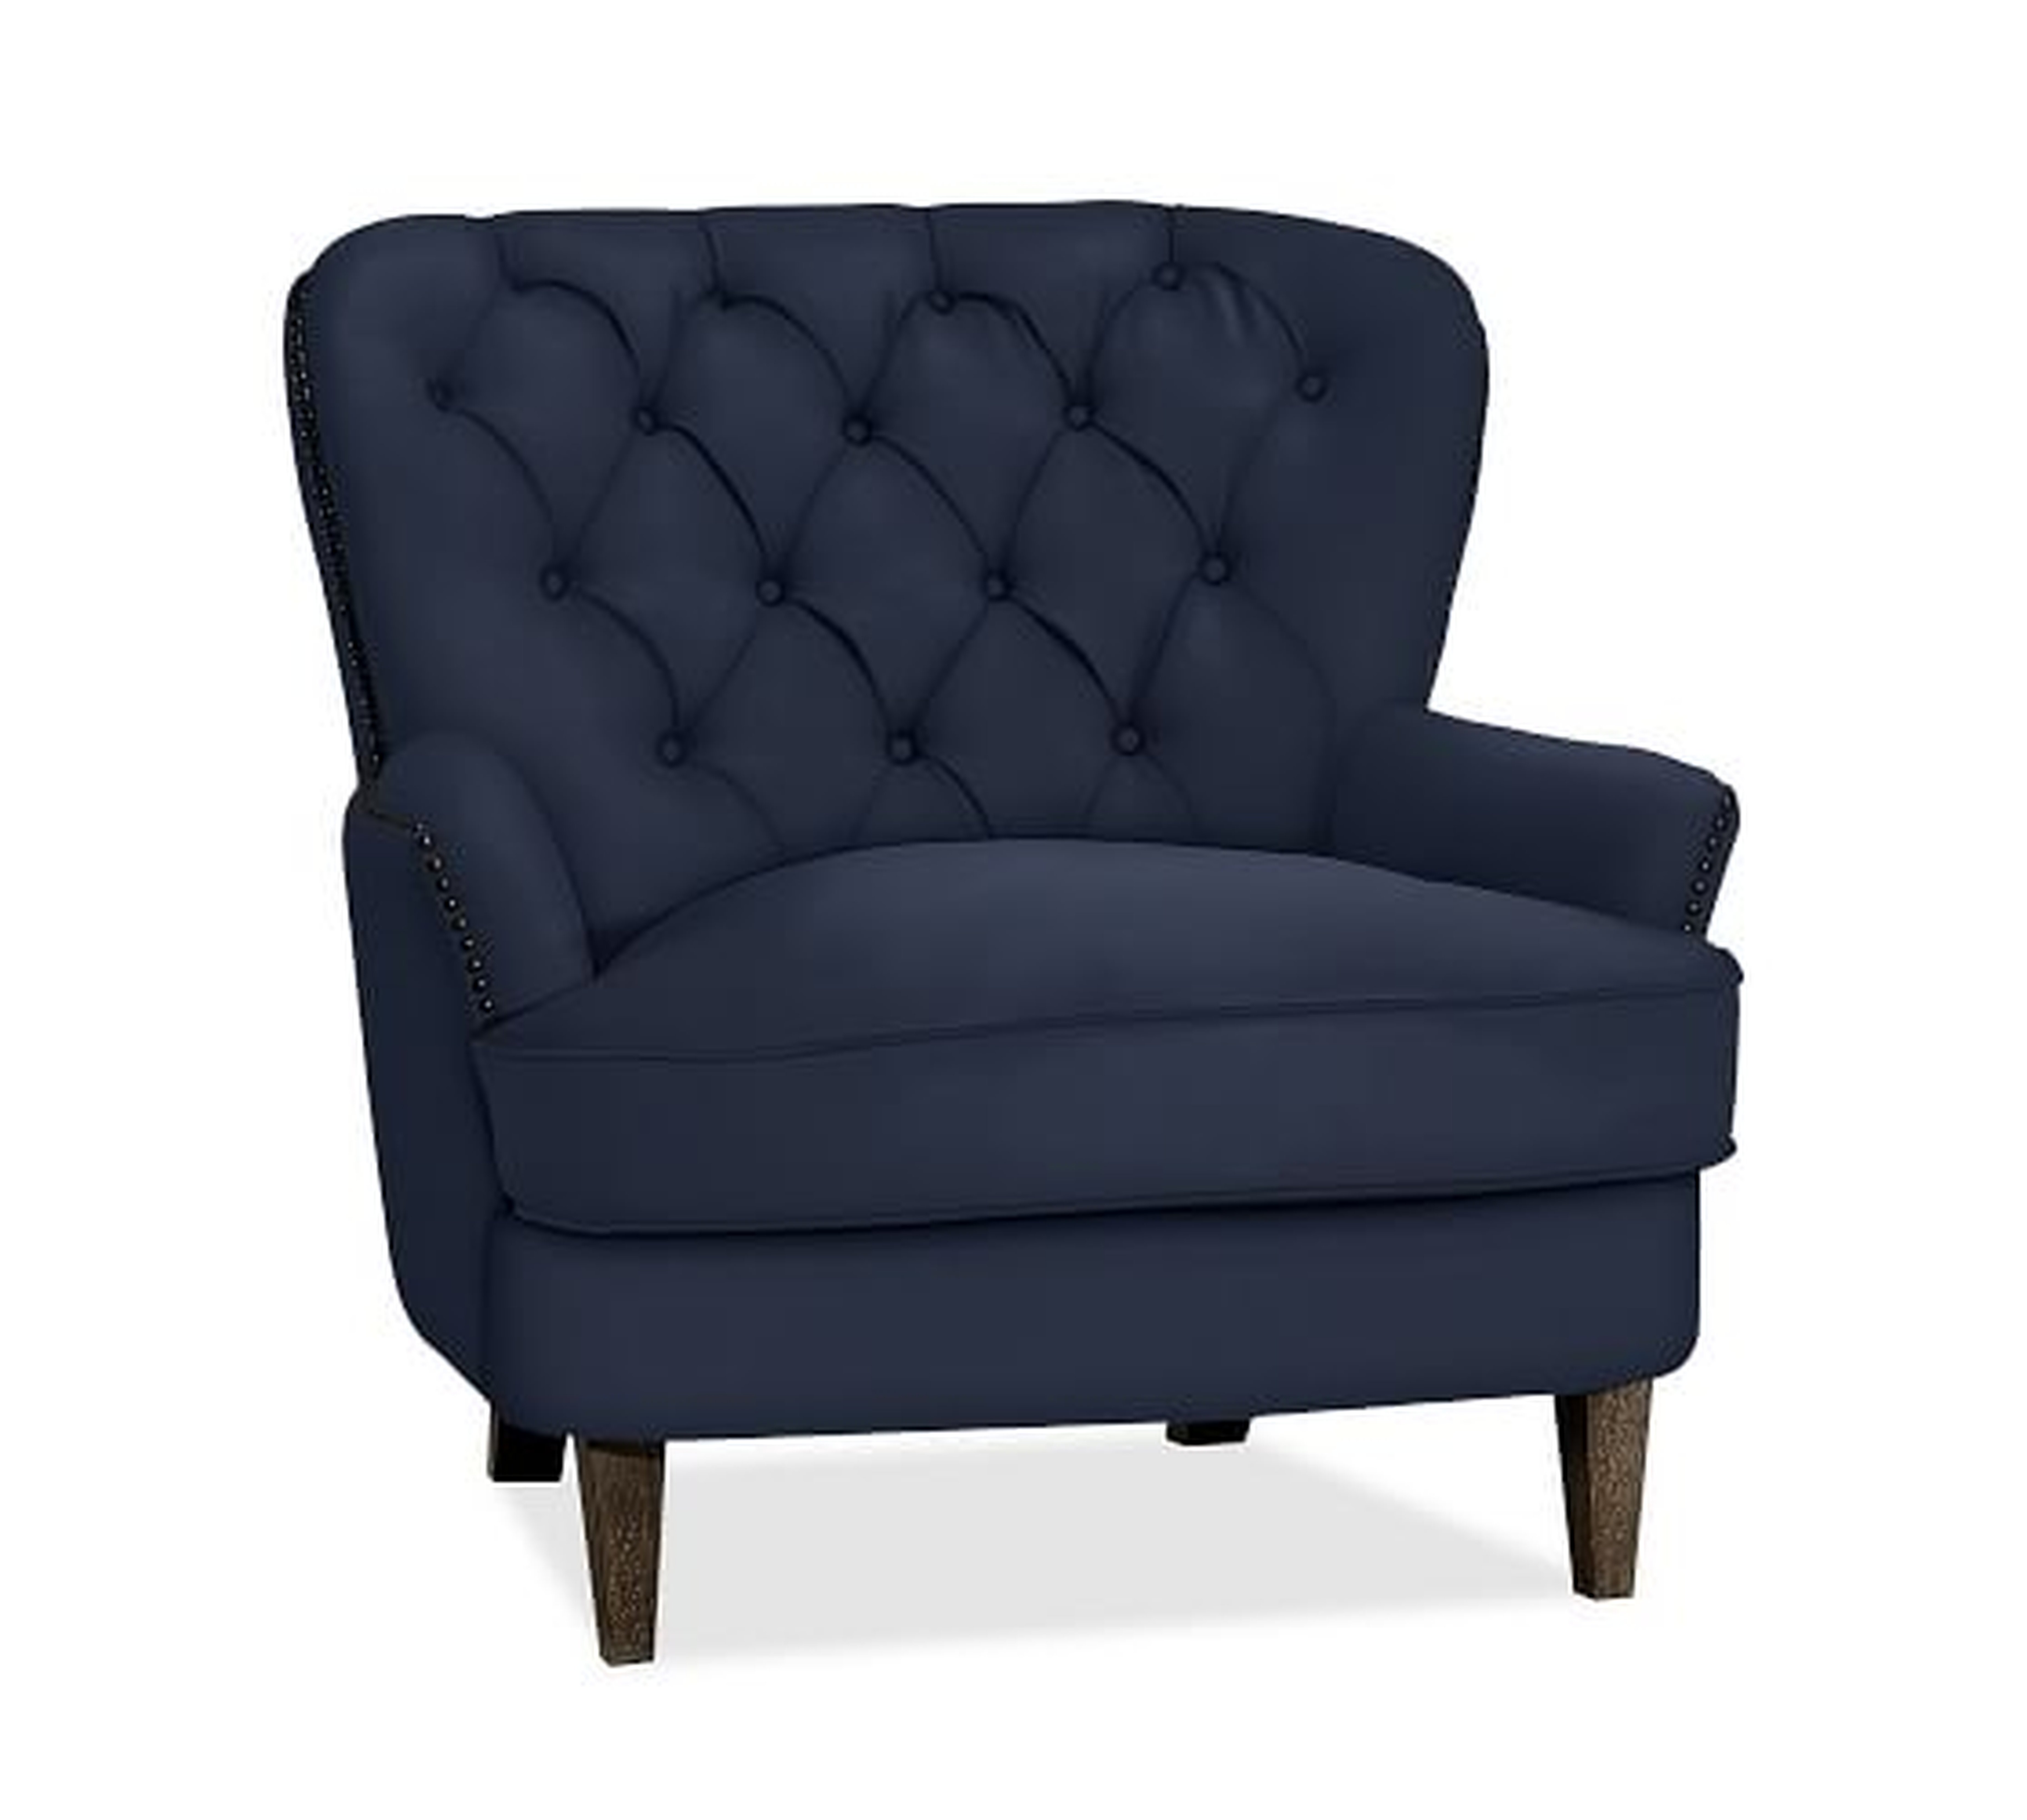 Cardiff Upholstered Armchair, Polyester Wrapped Cushions, Twill Cadet Navy - Pottery Barn